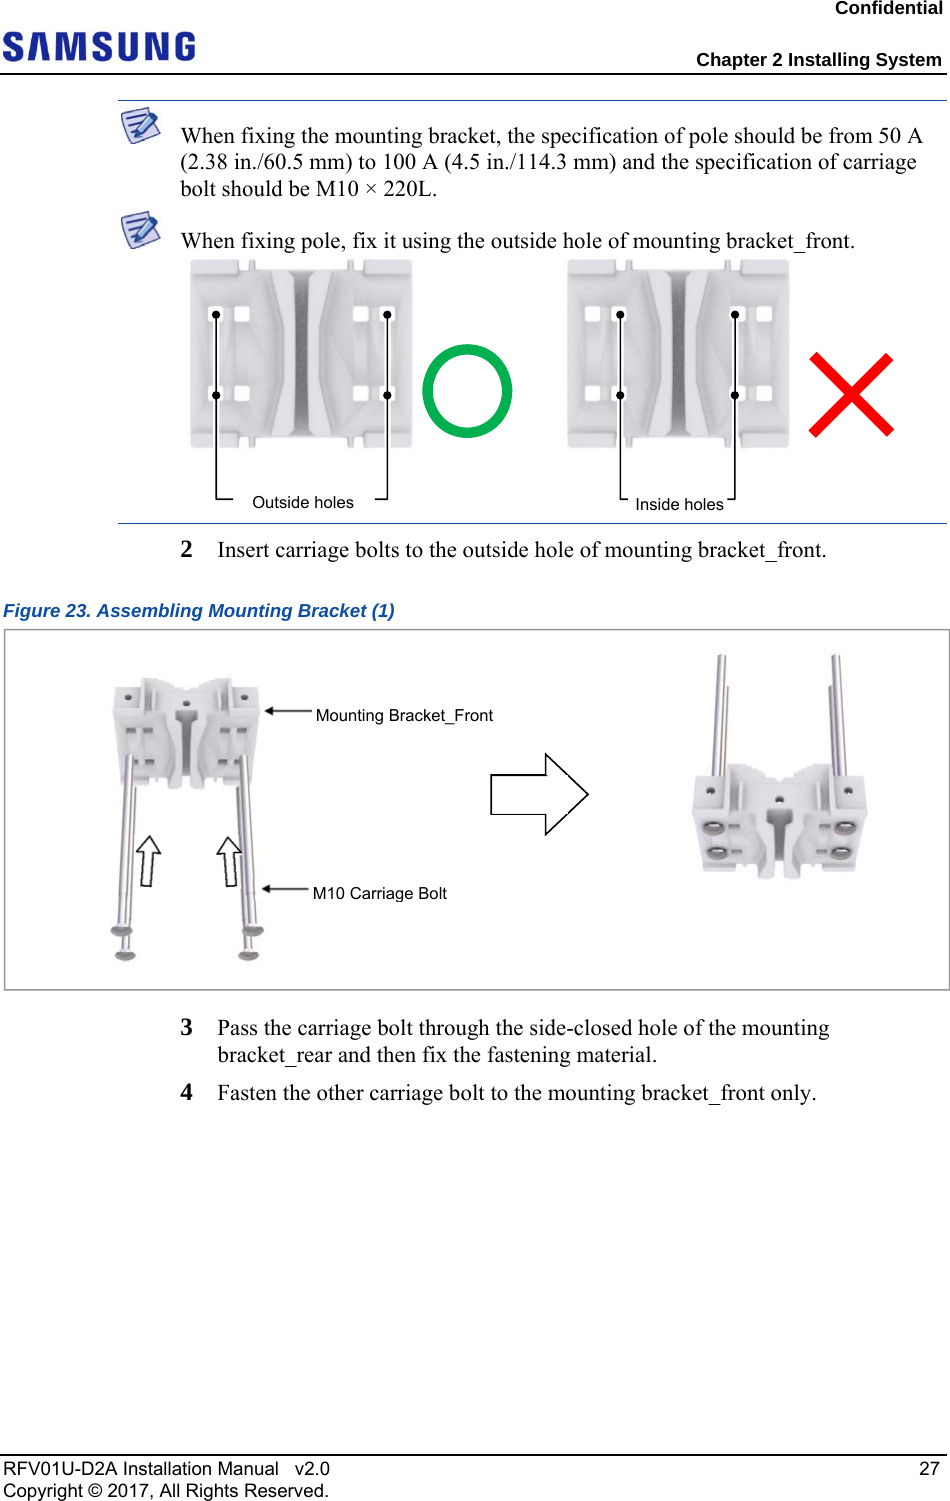 Confidential  Chapter 2 Installing System RFV01U-D2A Installation Manual   v2.0   27 Copyright © 2017, All Rights Reserved.  When fixing the mounting bracket, the specification of pole should be from 50 A (2.38 in./60.5 mm) to 100 A (4.5 in./114.3 mm) and the specification of carriage bolt should be M10 × 220L.  When fixing pole, fix it using the outside hole of mounting bracket_front.  2  Insert carriage bolts to the outside hole of mounting bracket_front. Figure 23. Assembling Mounting Bracket (1)  3  Pass the carriage bolt through the side-closed hole of the mounting bracket_rear and then fix the fastening material. 4  Fasten the other carriage bolt to the mounting bracket_front only. Inside holesOutside holes M10 Carriage BoltMounting Bracket_Front 